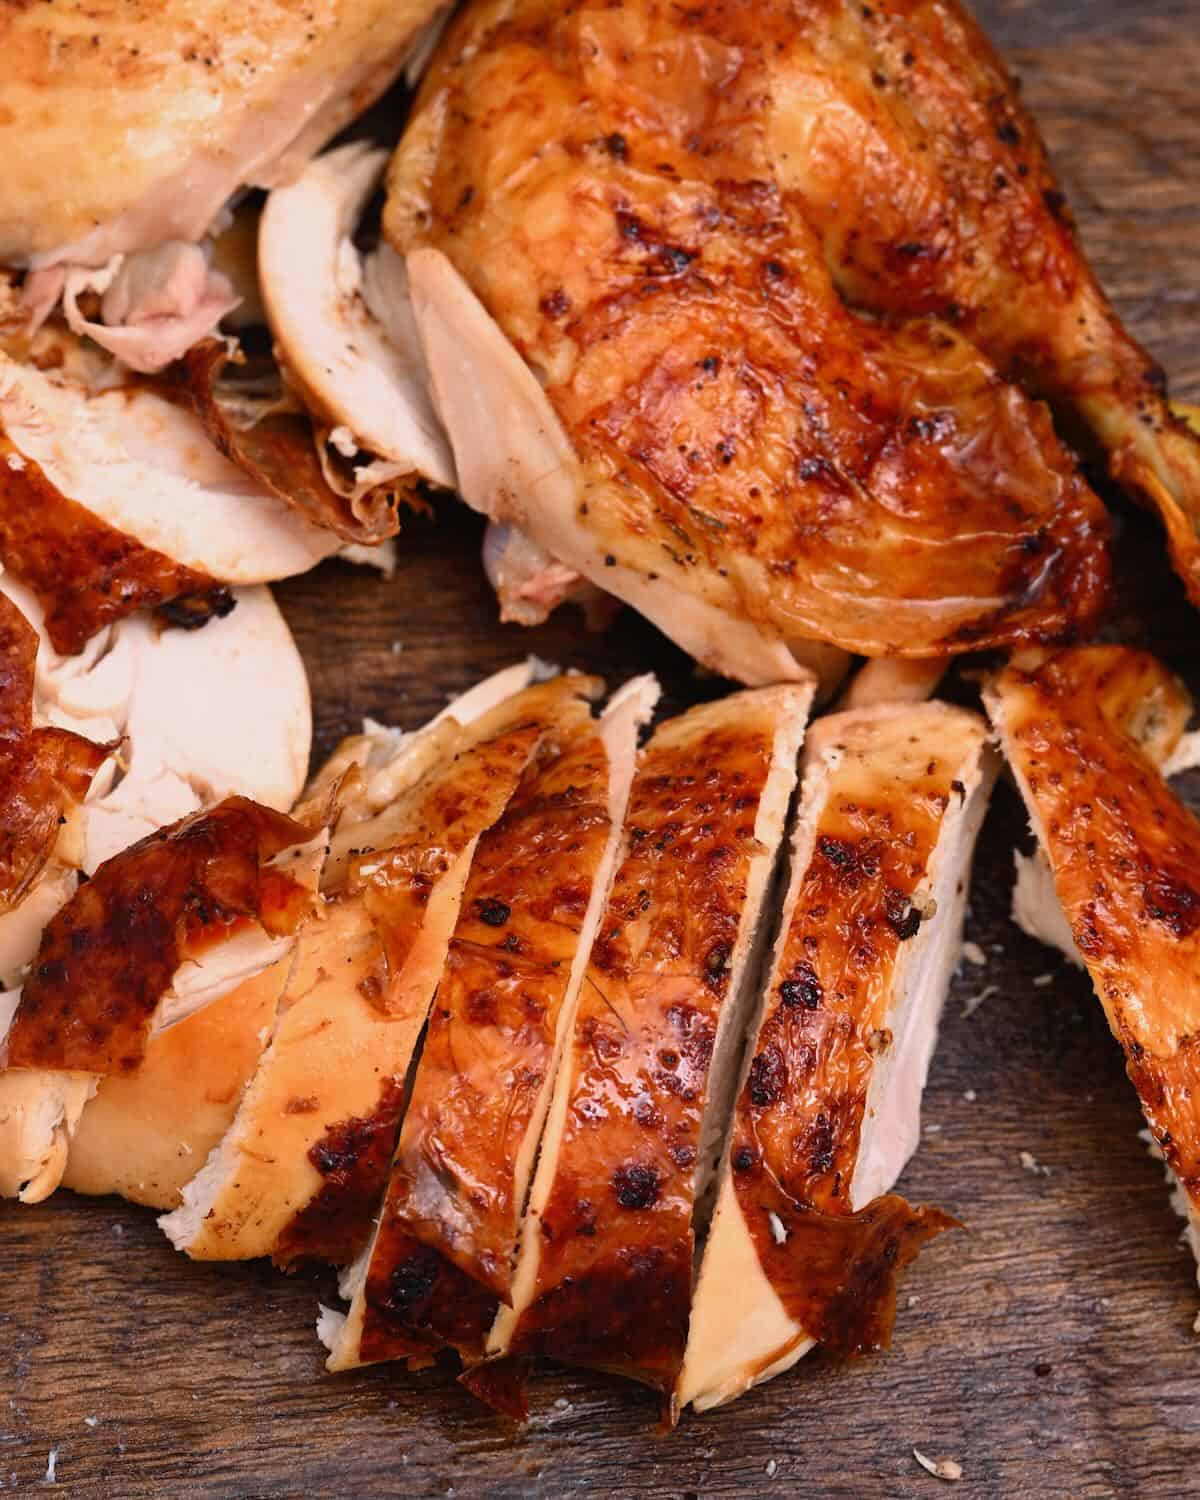 Roasted chicken sliced into pieces